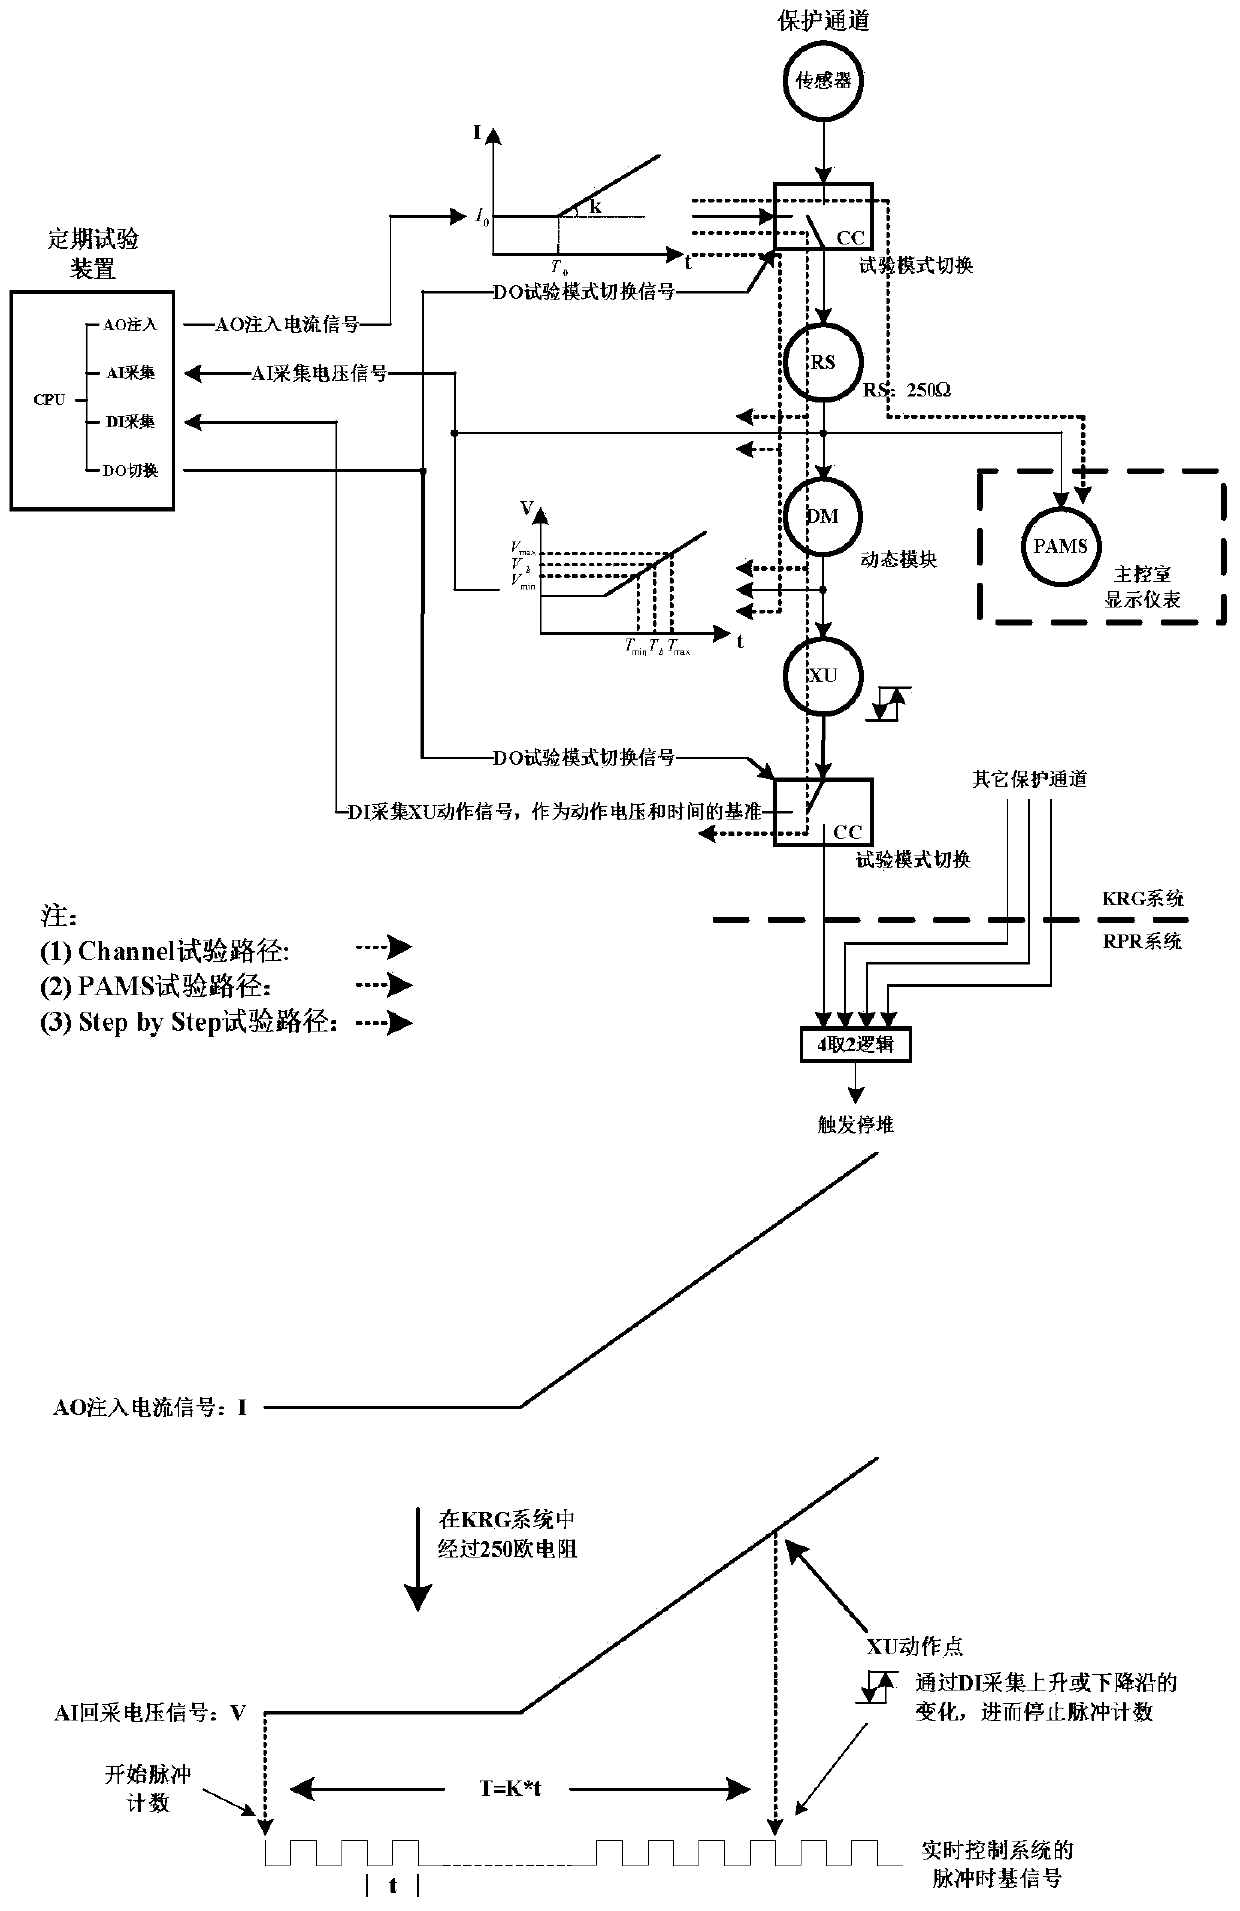 A Periodic Test Device for Protection System of PWR Nuclear Power Plant